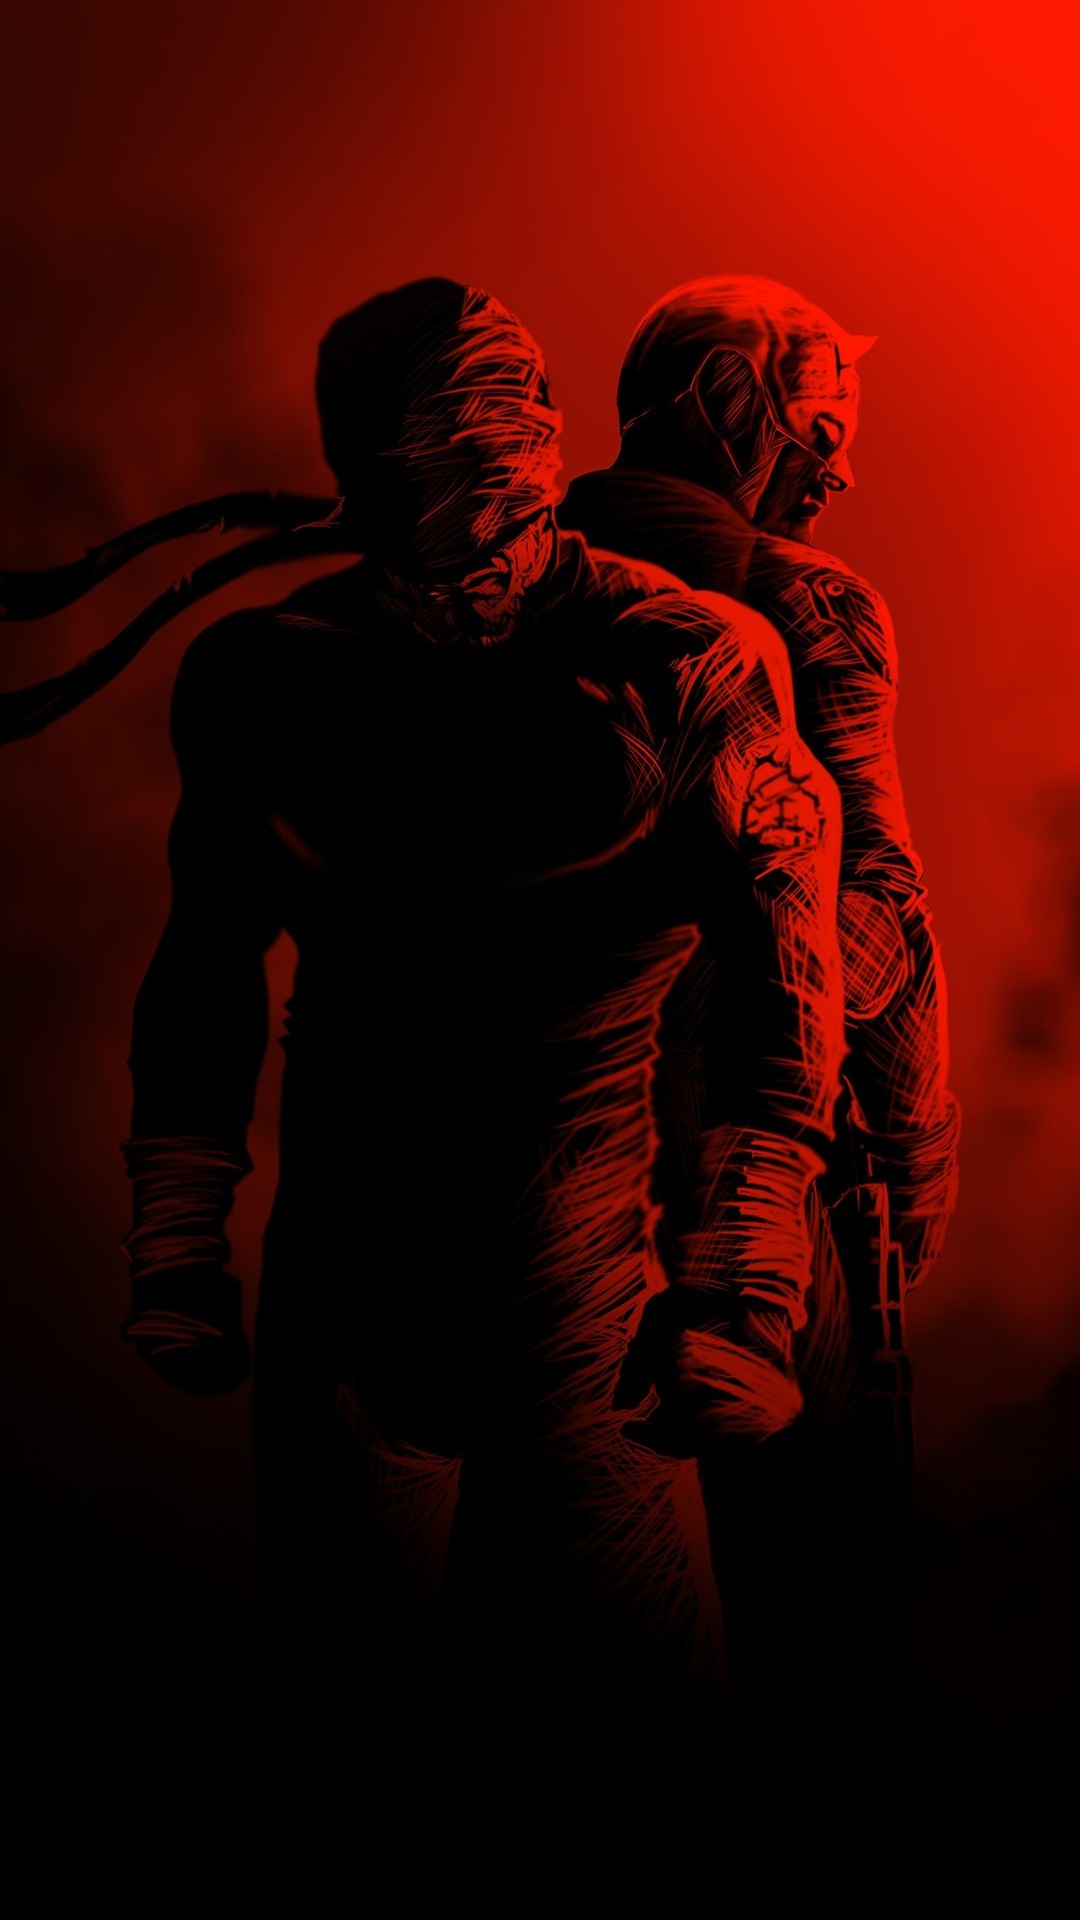 1080x1920 Fan Content#Daredevil wallpaper found on AMOLED Wallpapers for #Android.  Really hoping Disney sticks with Netflix's storylines instead of rebooting  them.